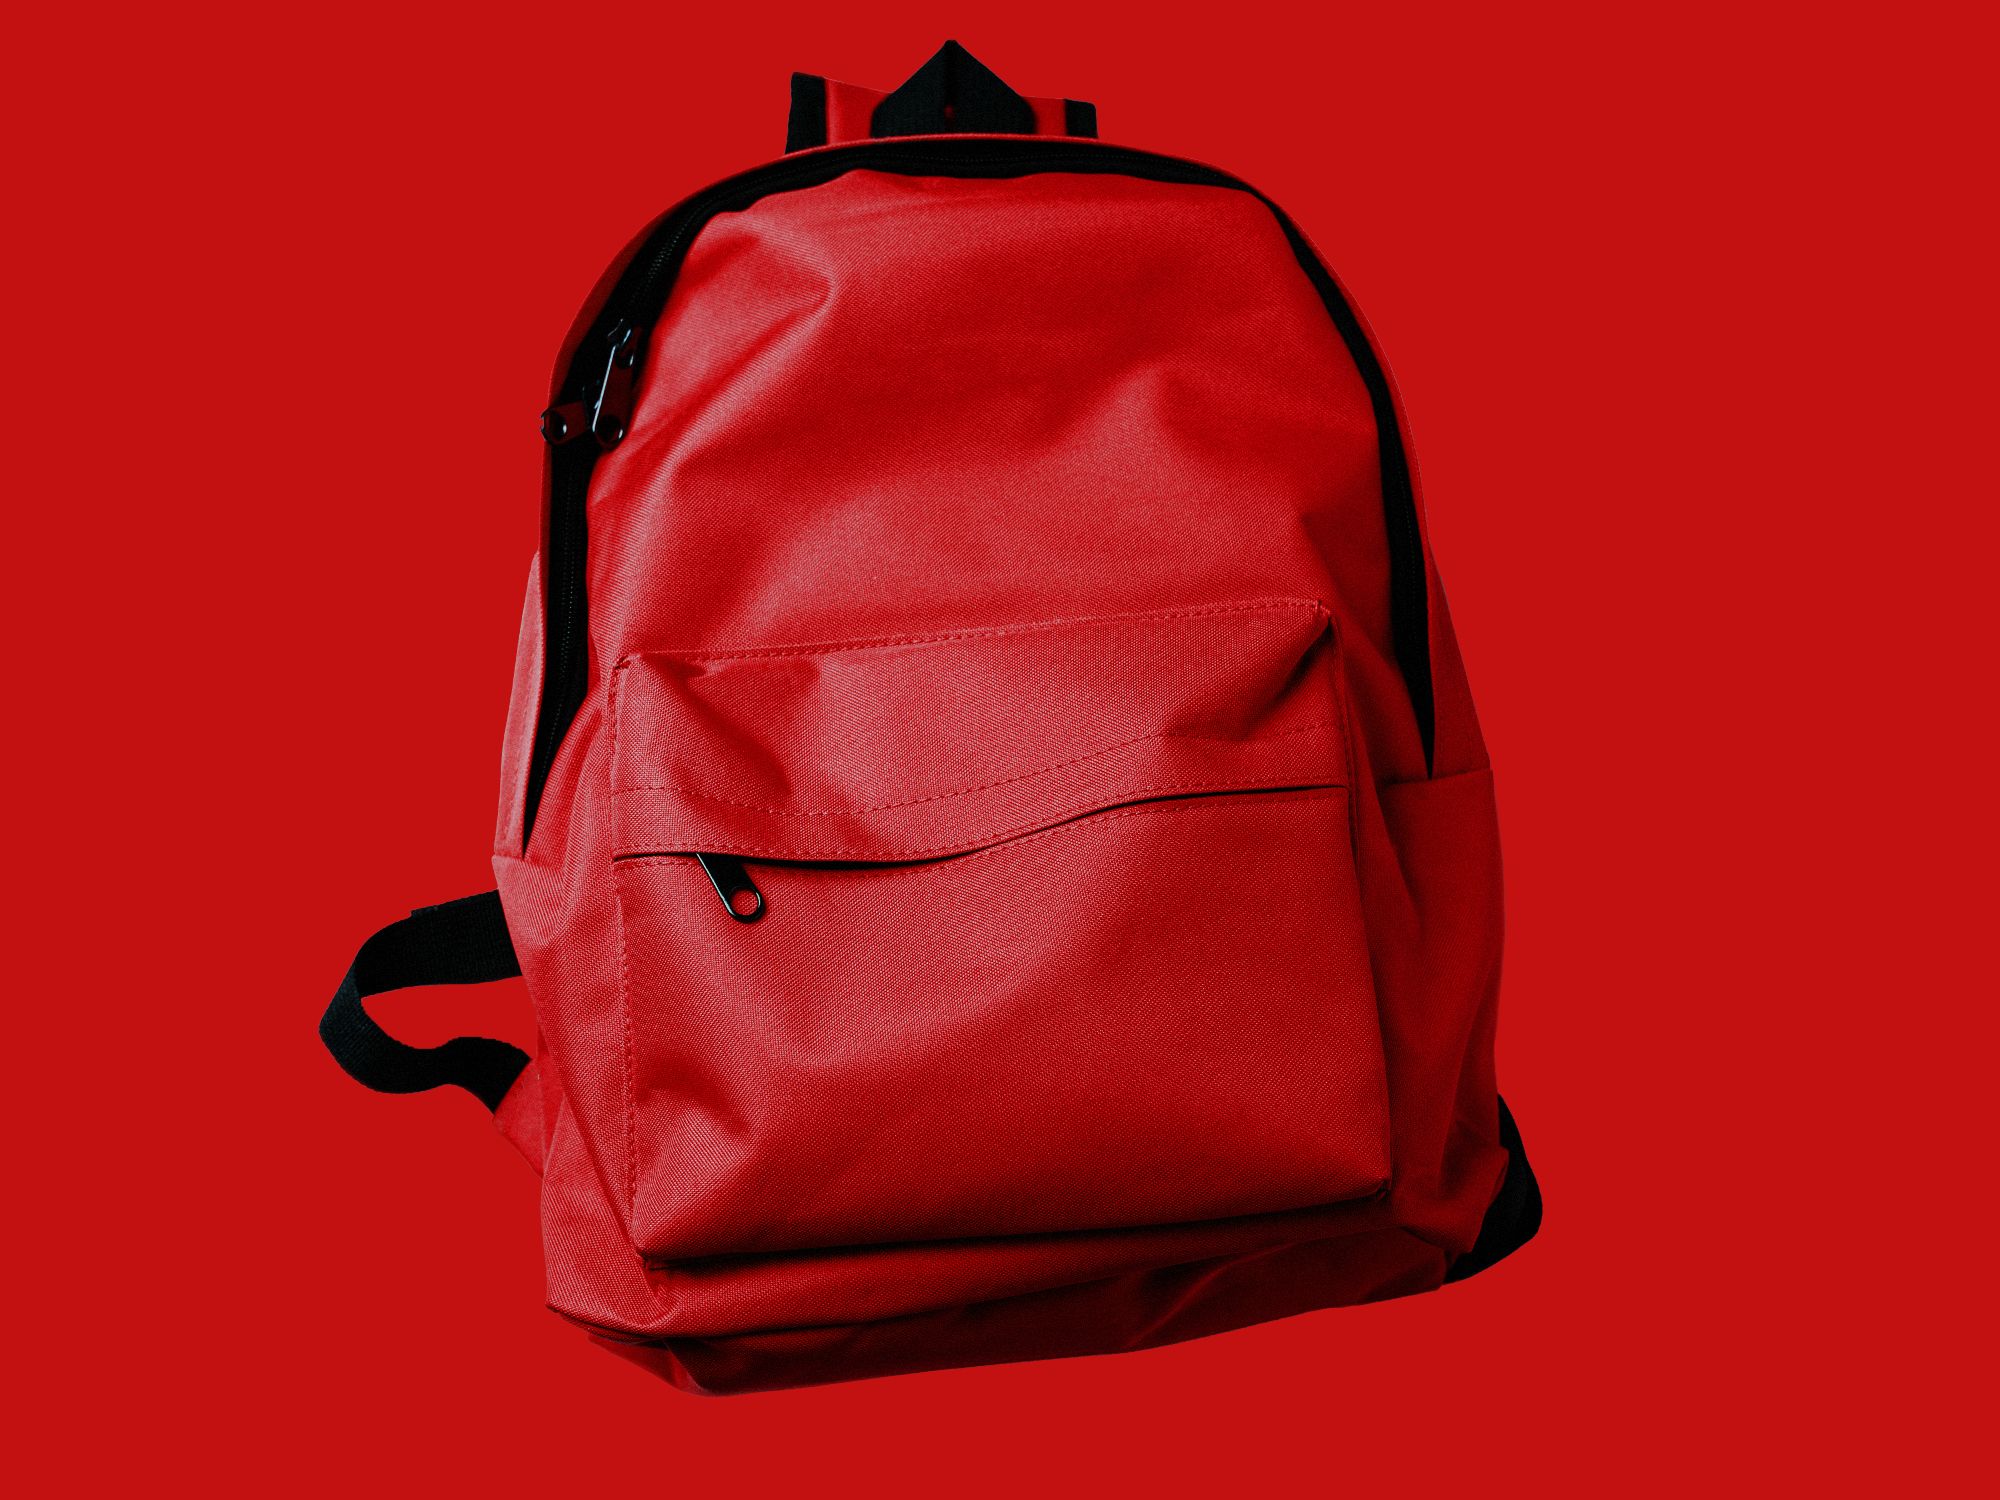 red backpack on red background